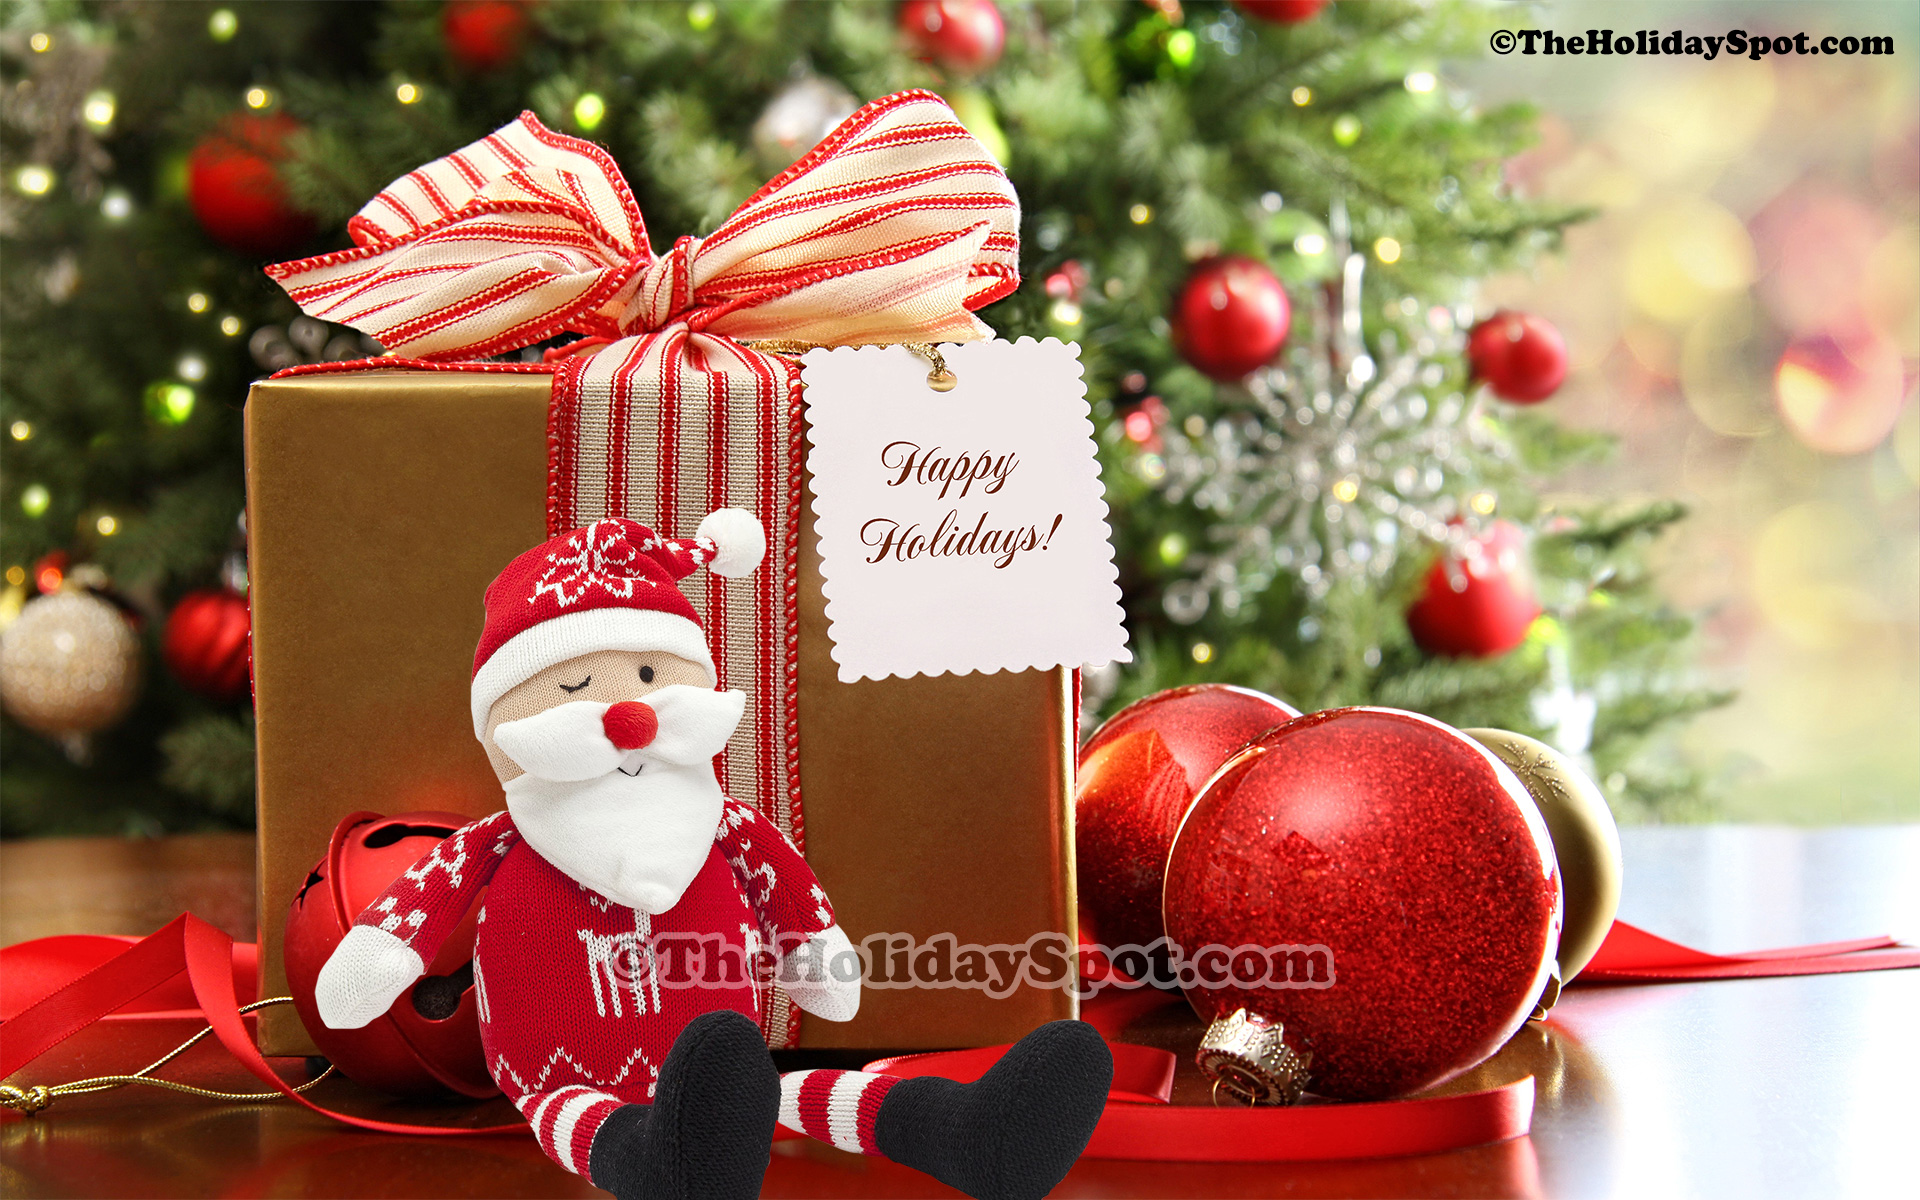 Christmas Gifts Background Images - Free Download on Freepik